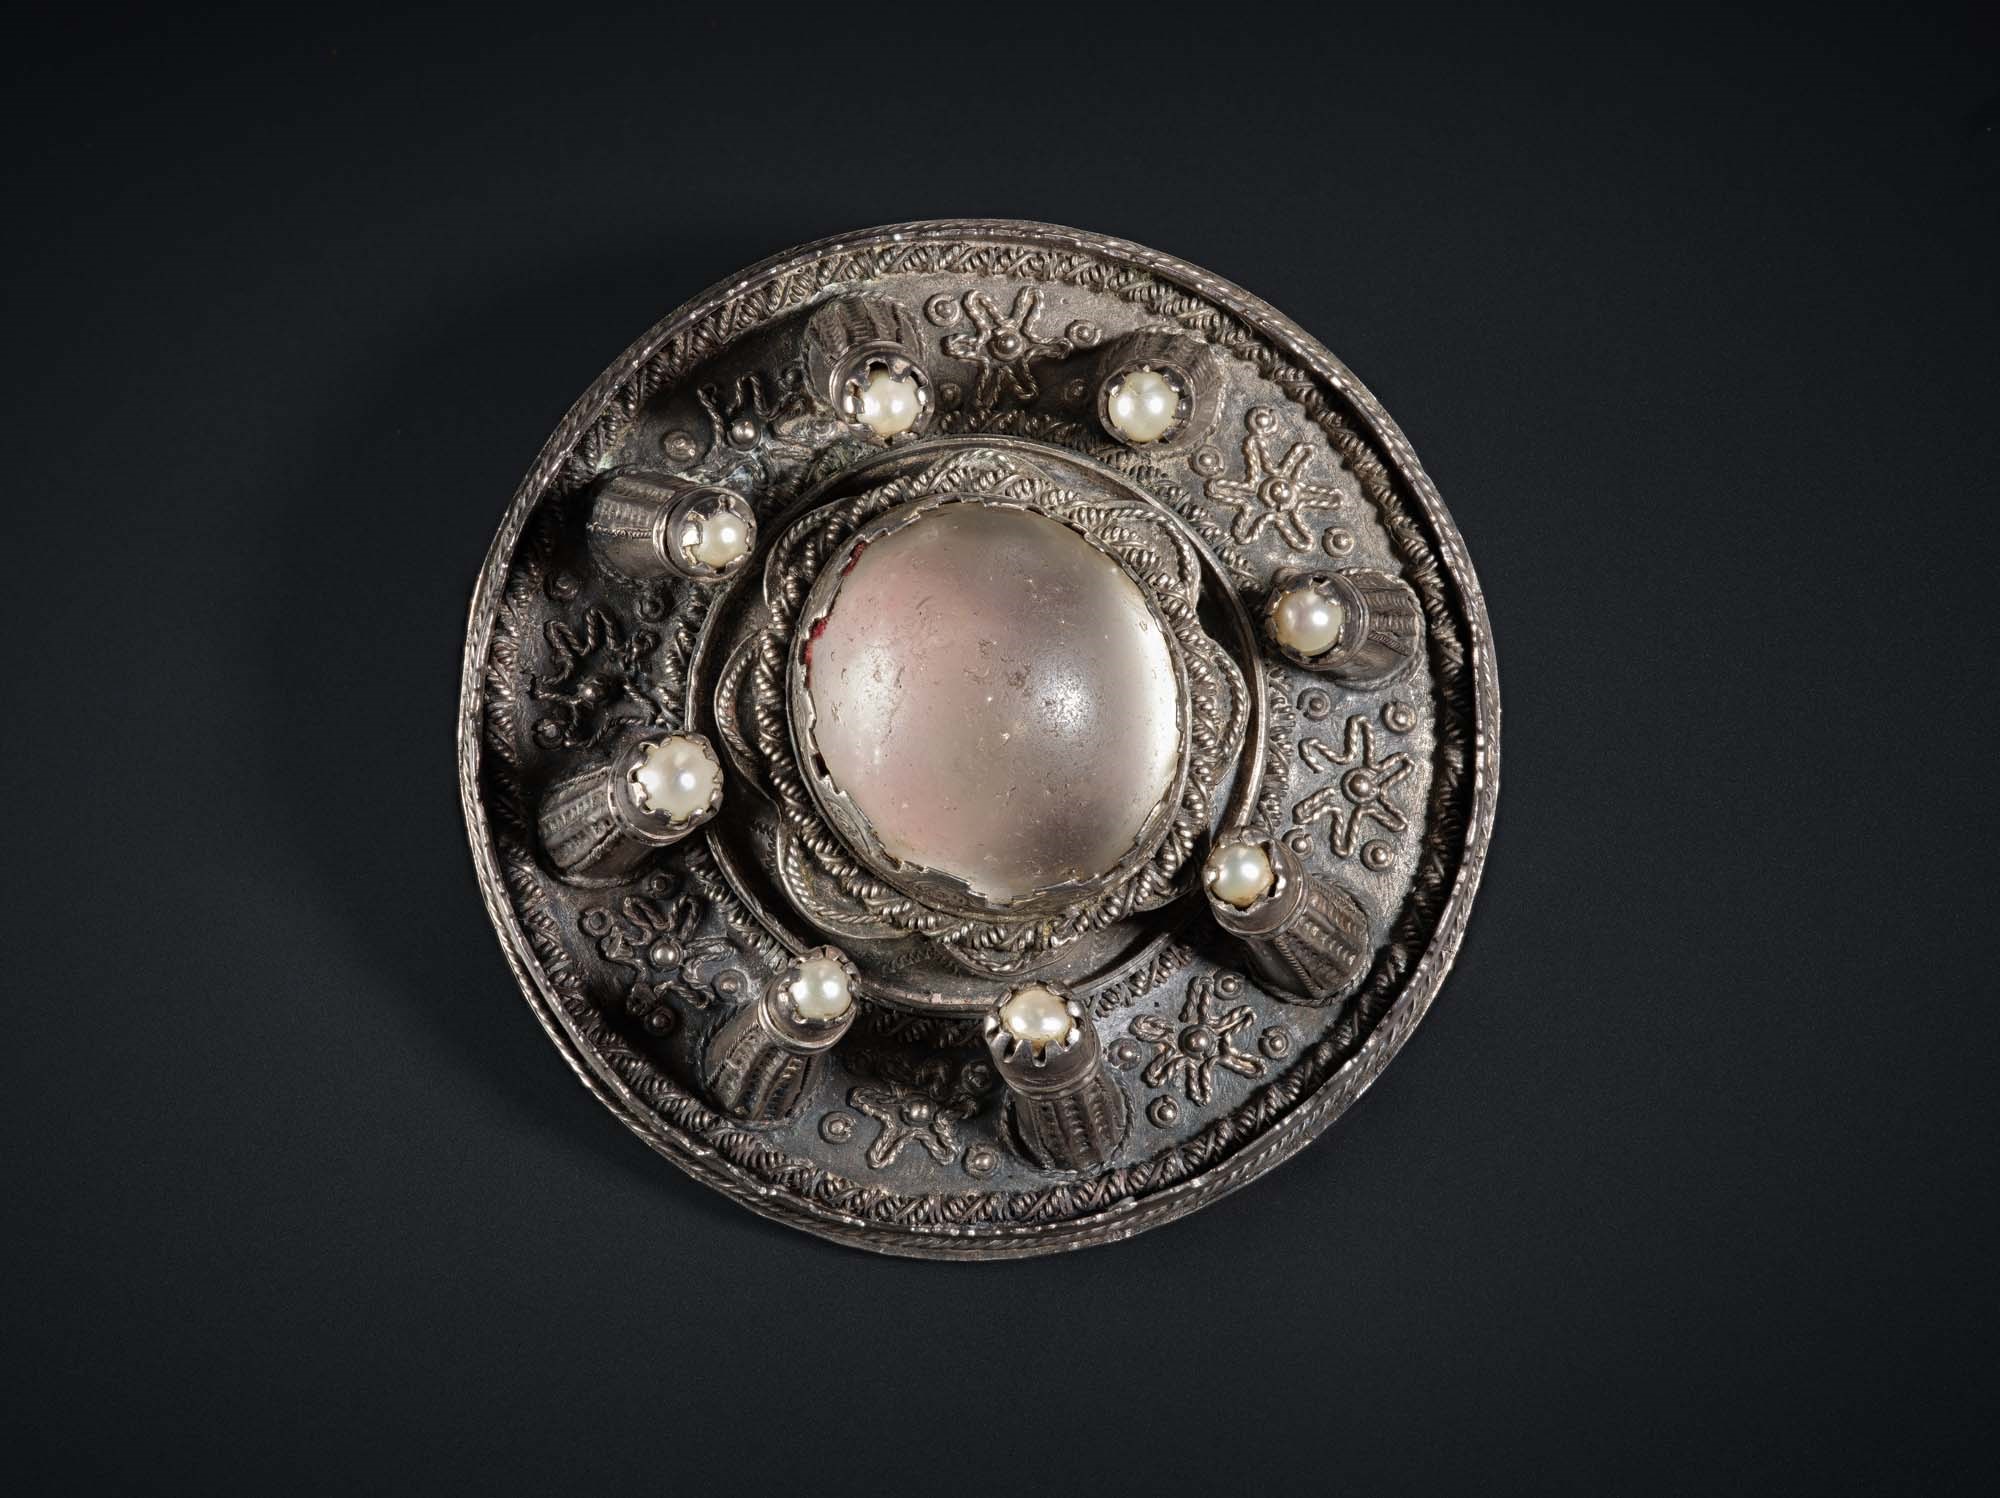 A circular metal brooch with raised decorative elements.